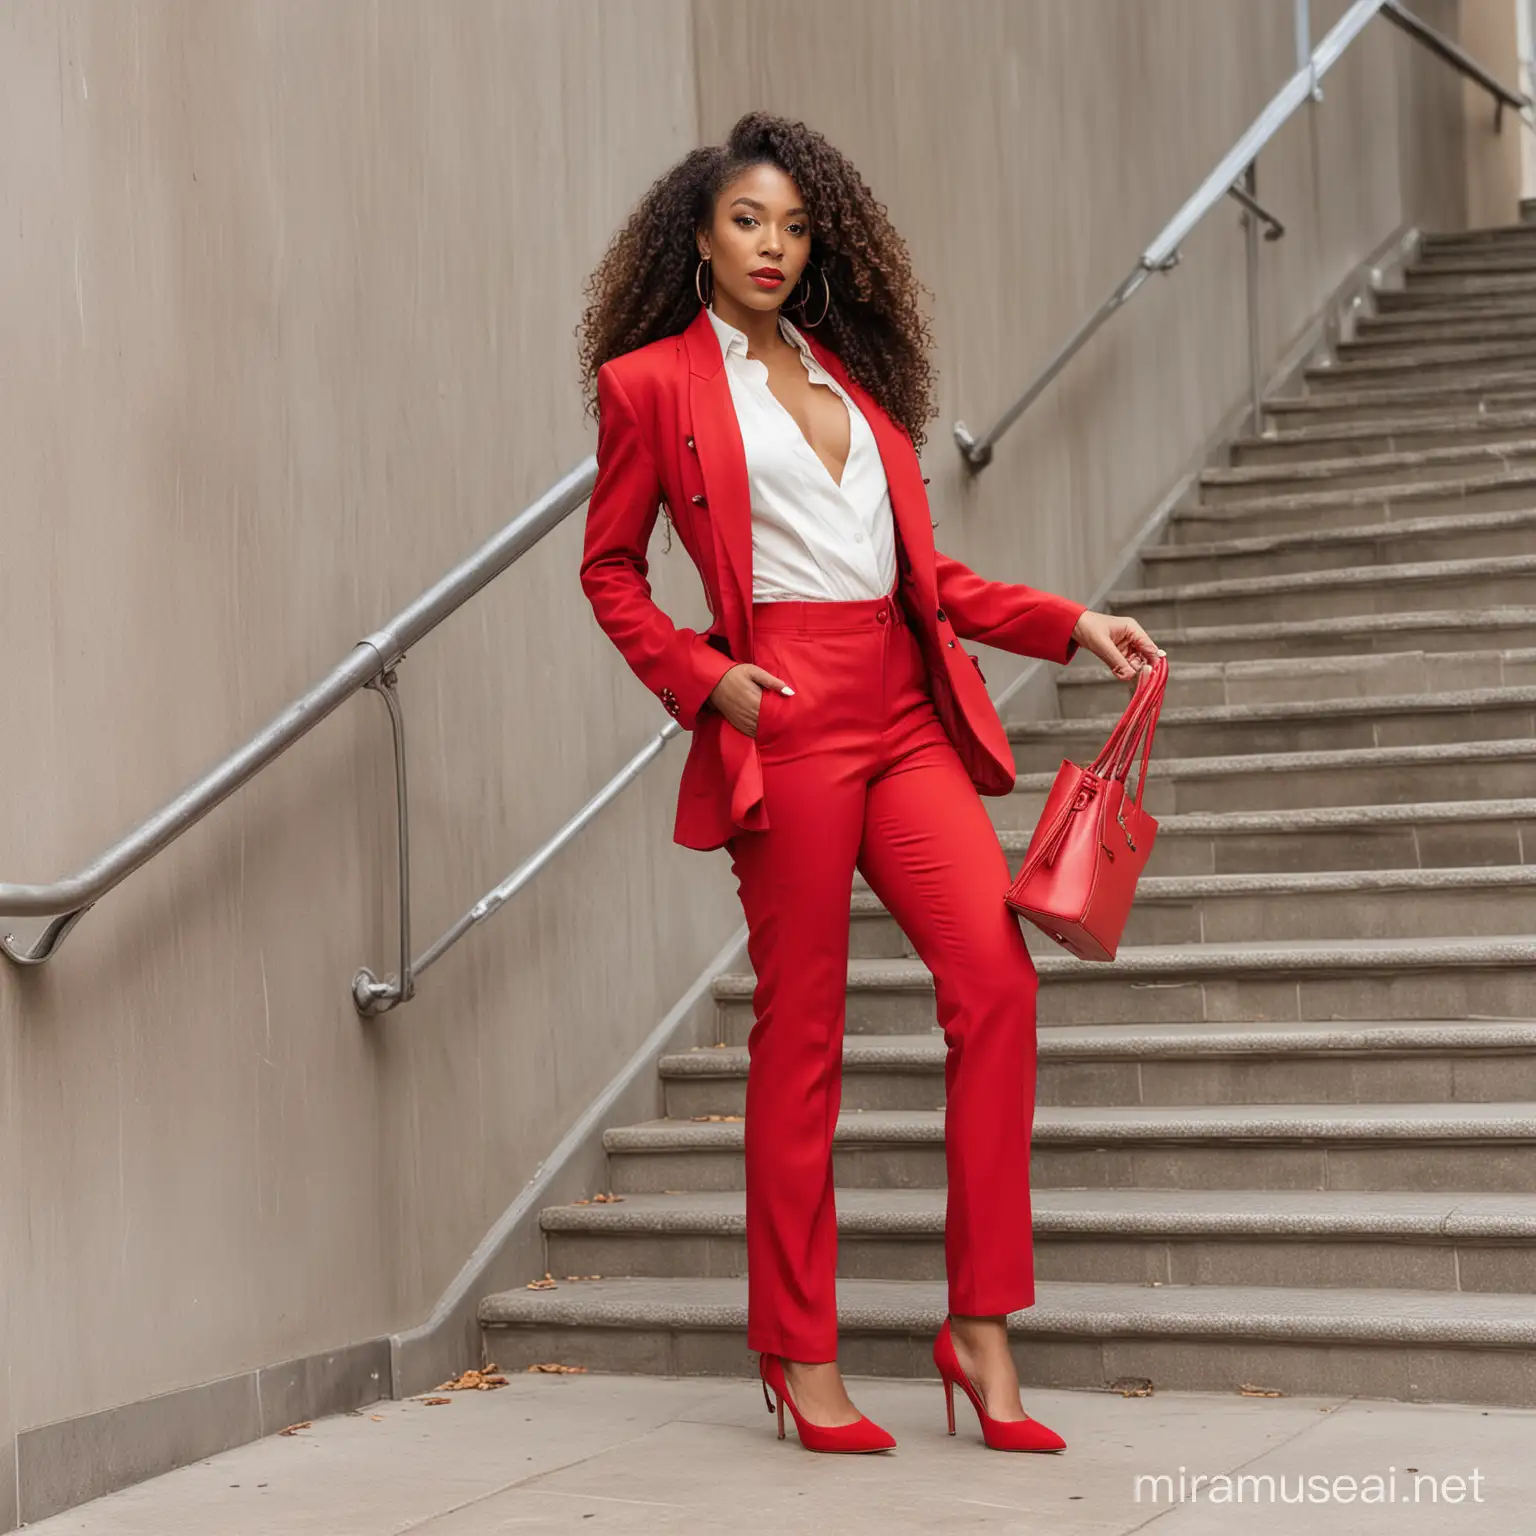 Beautiful Black woman in red high heels wearing a red pant suit and a jacket with long curly hair and holding a designer handbag walking up the stairs.